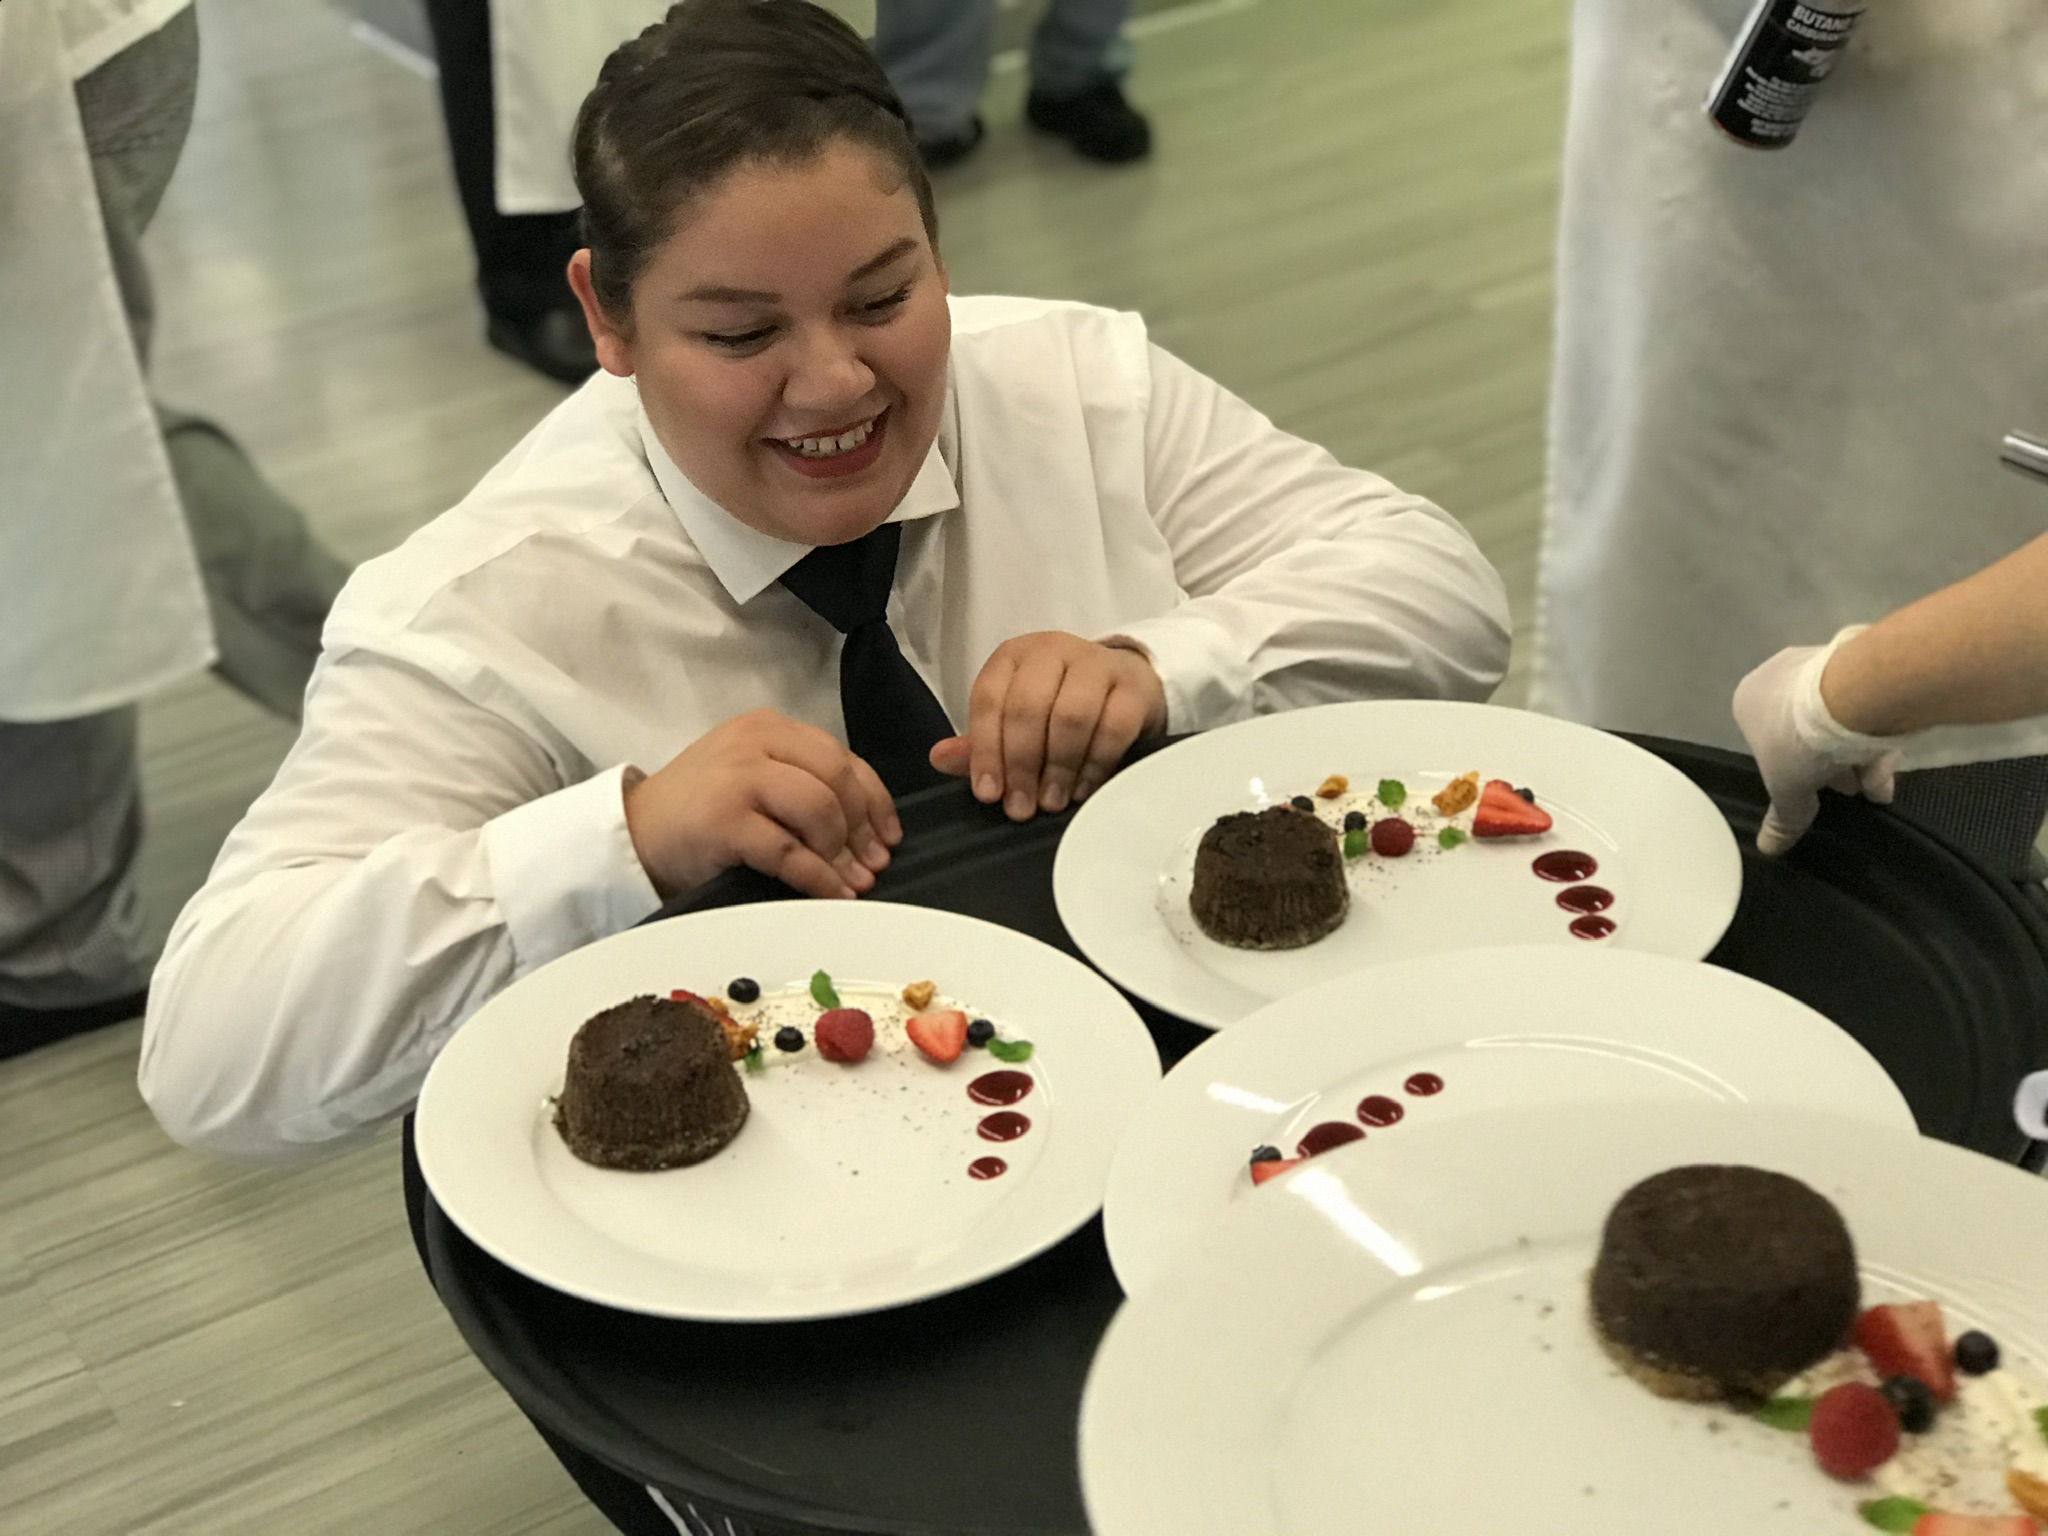 Student Introducing Her Desserts